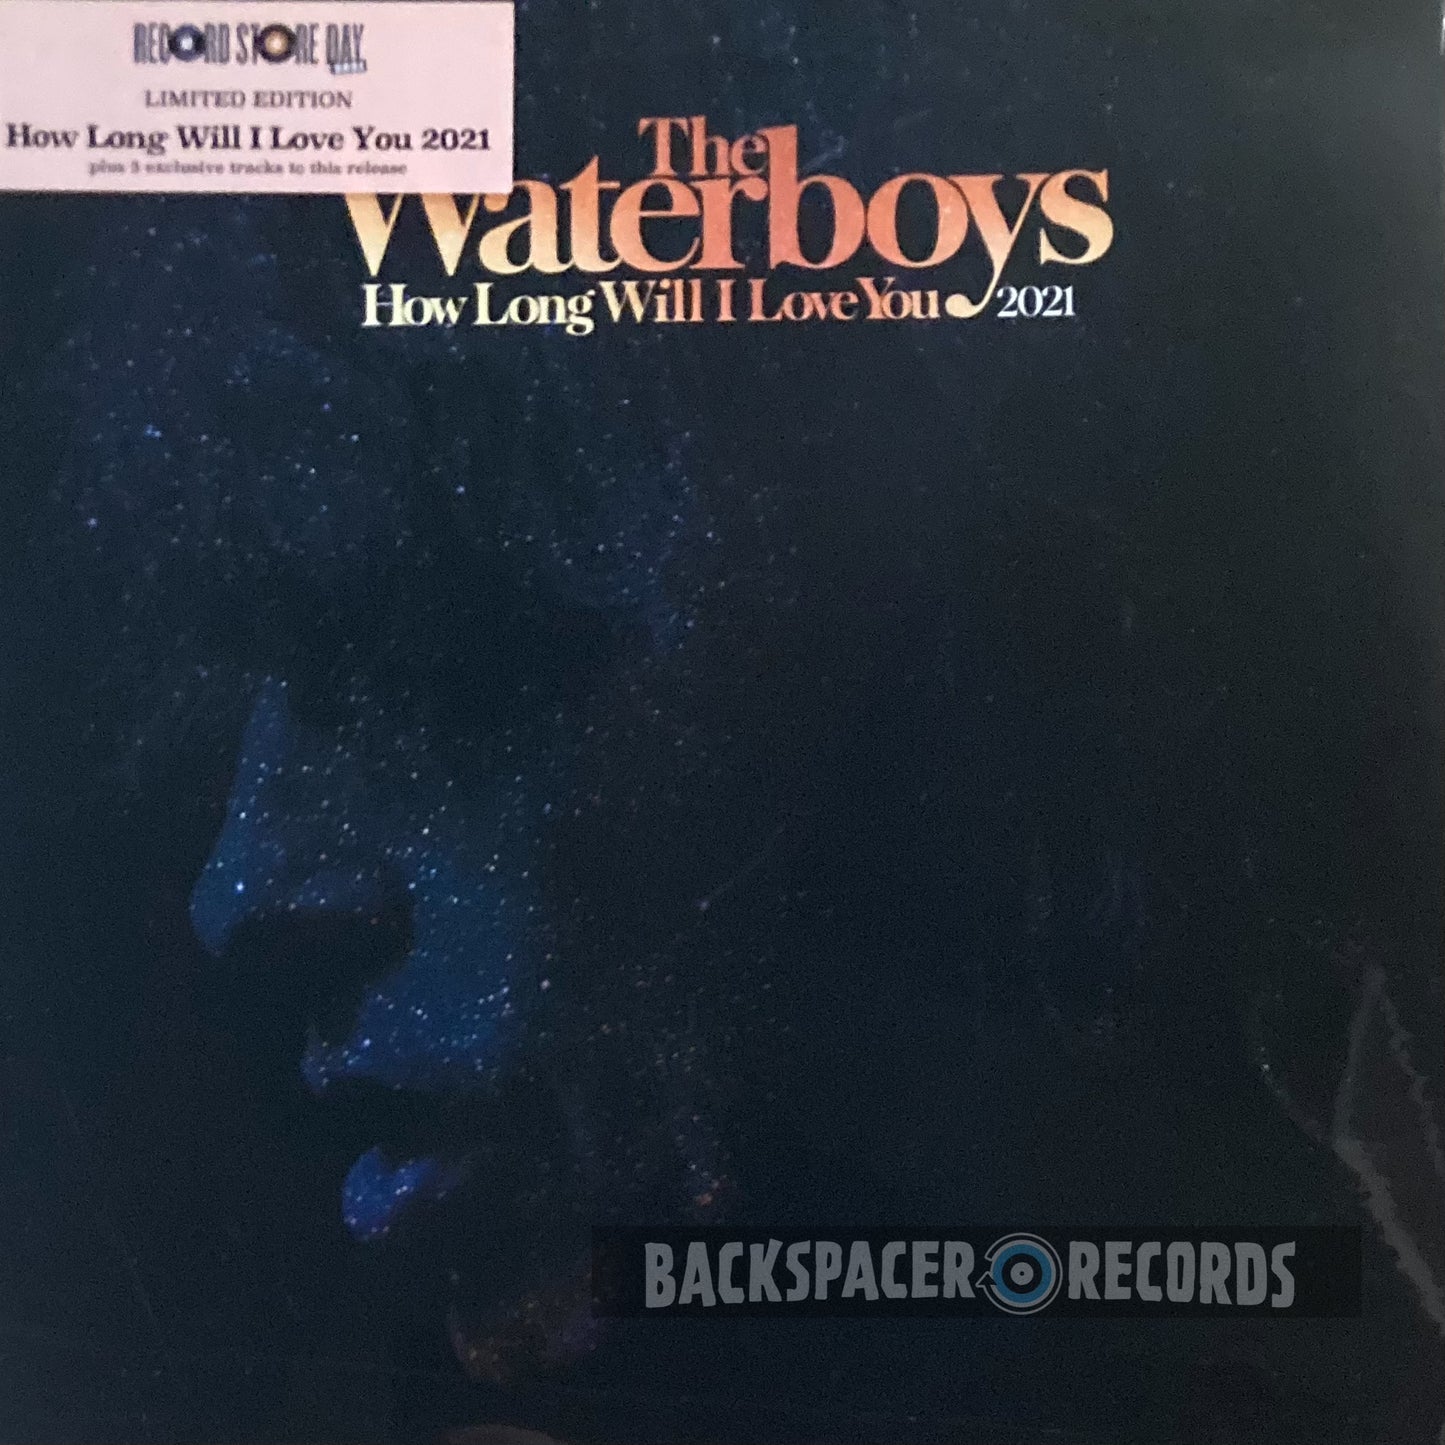 The Waterboys - How Long Will I Love You (2021 Remix) (Limited Edition) 12" Single (Sealed)